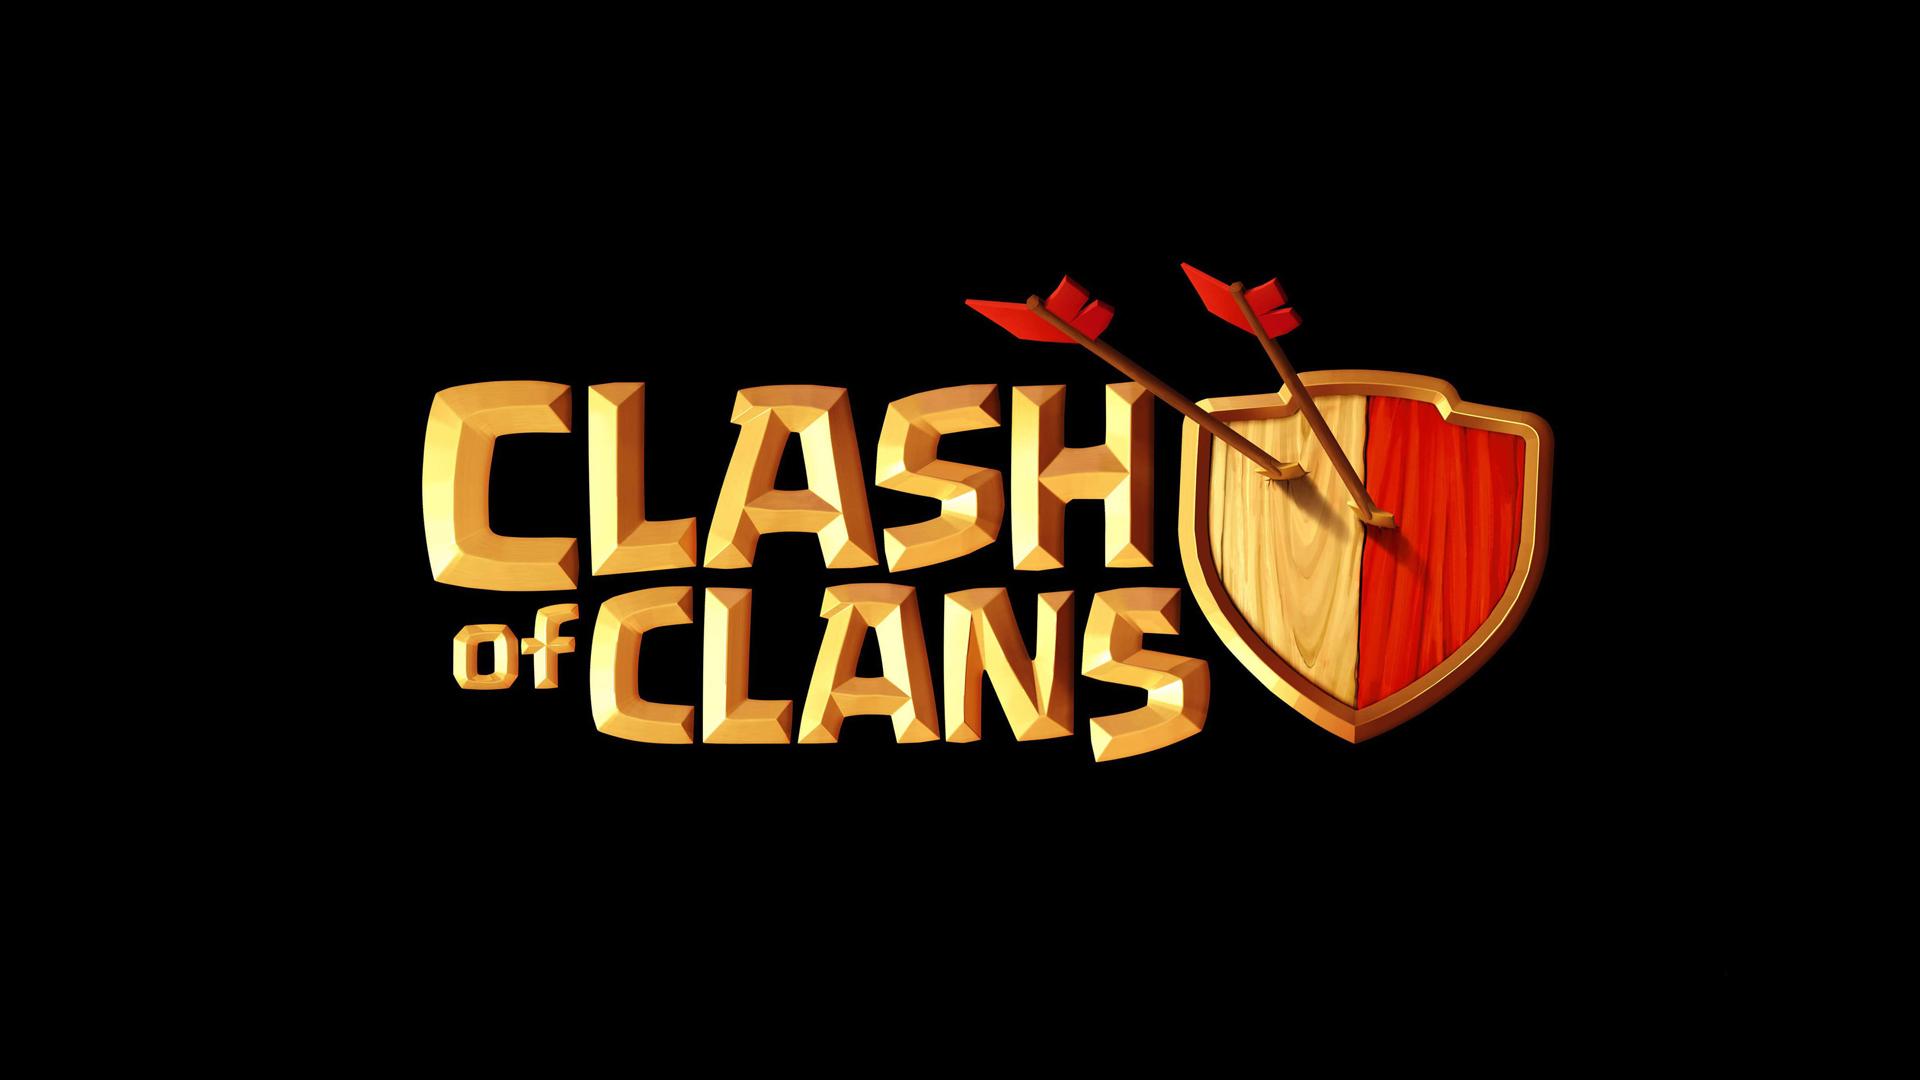 Blog Clash of Clans Only Gaming